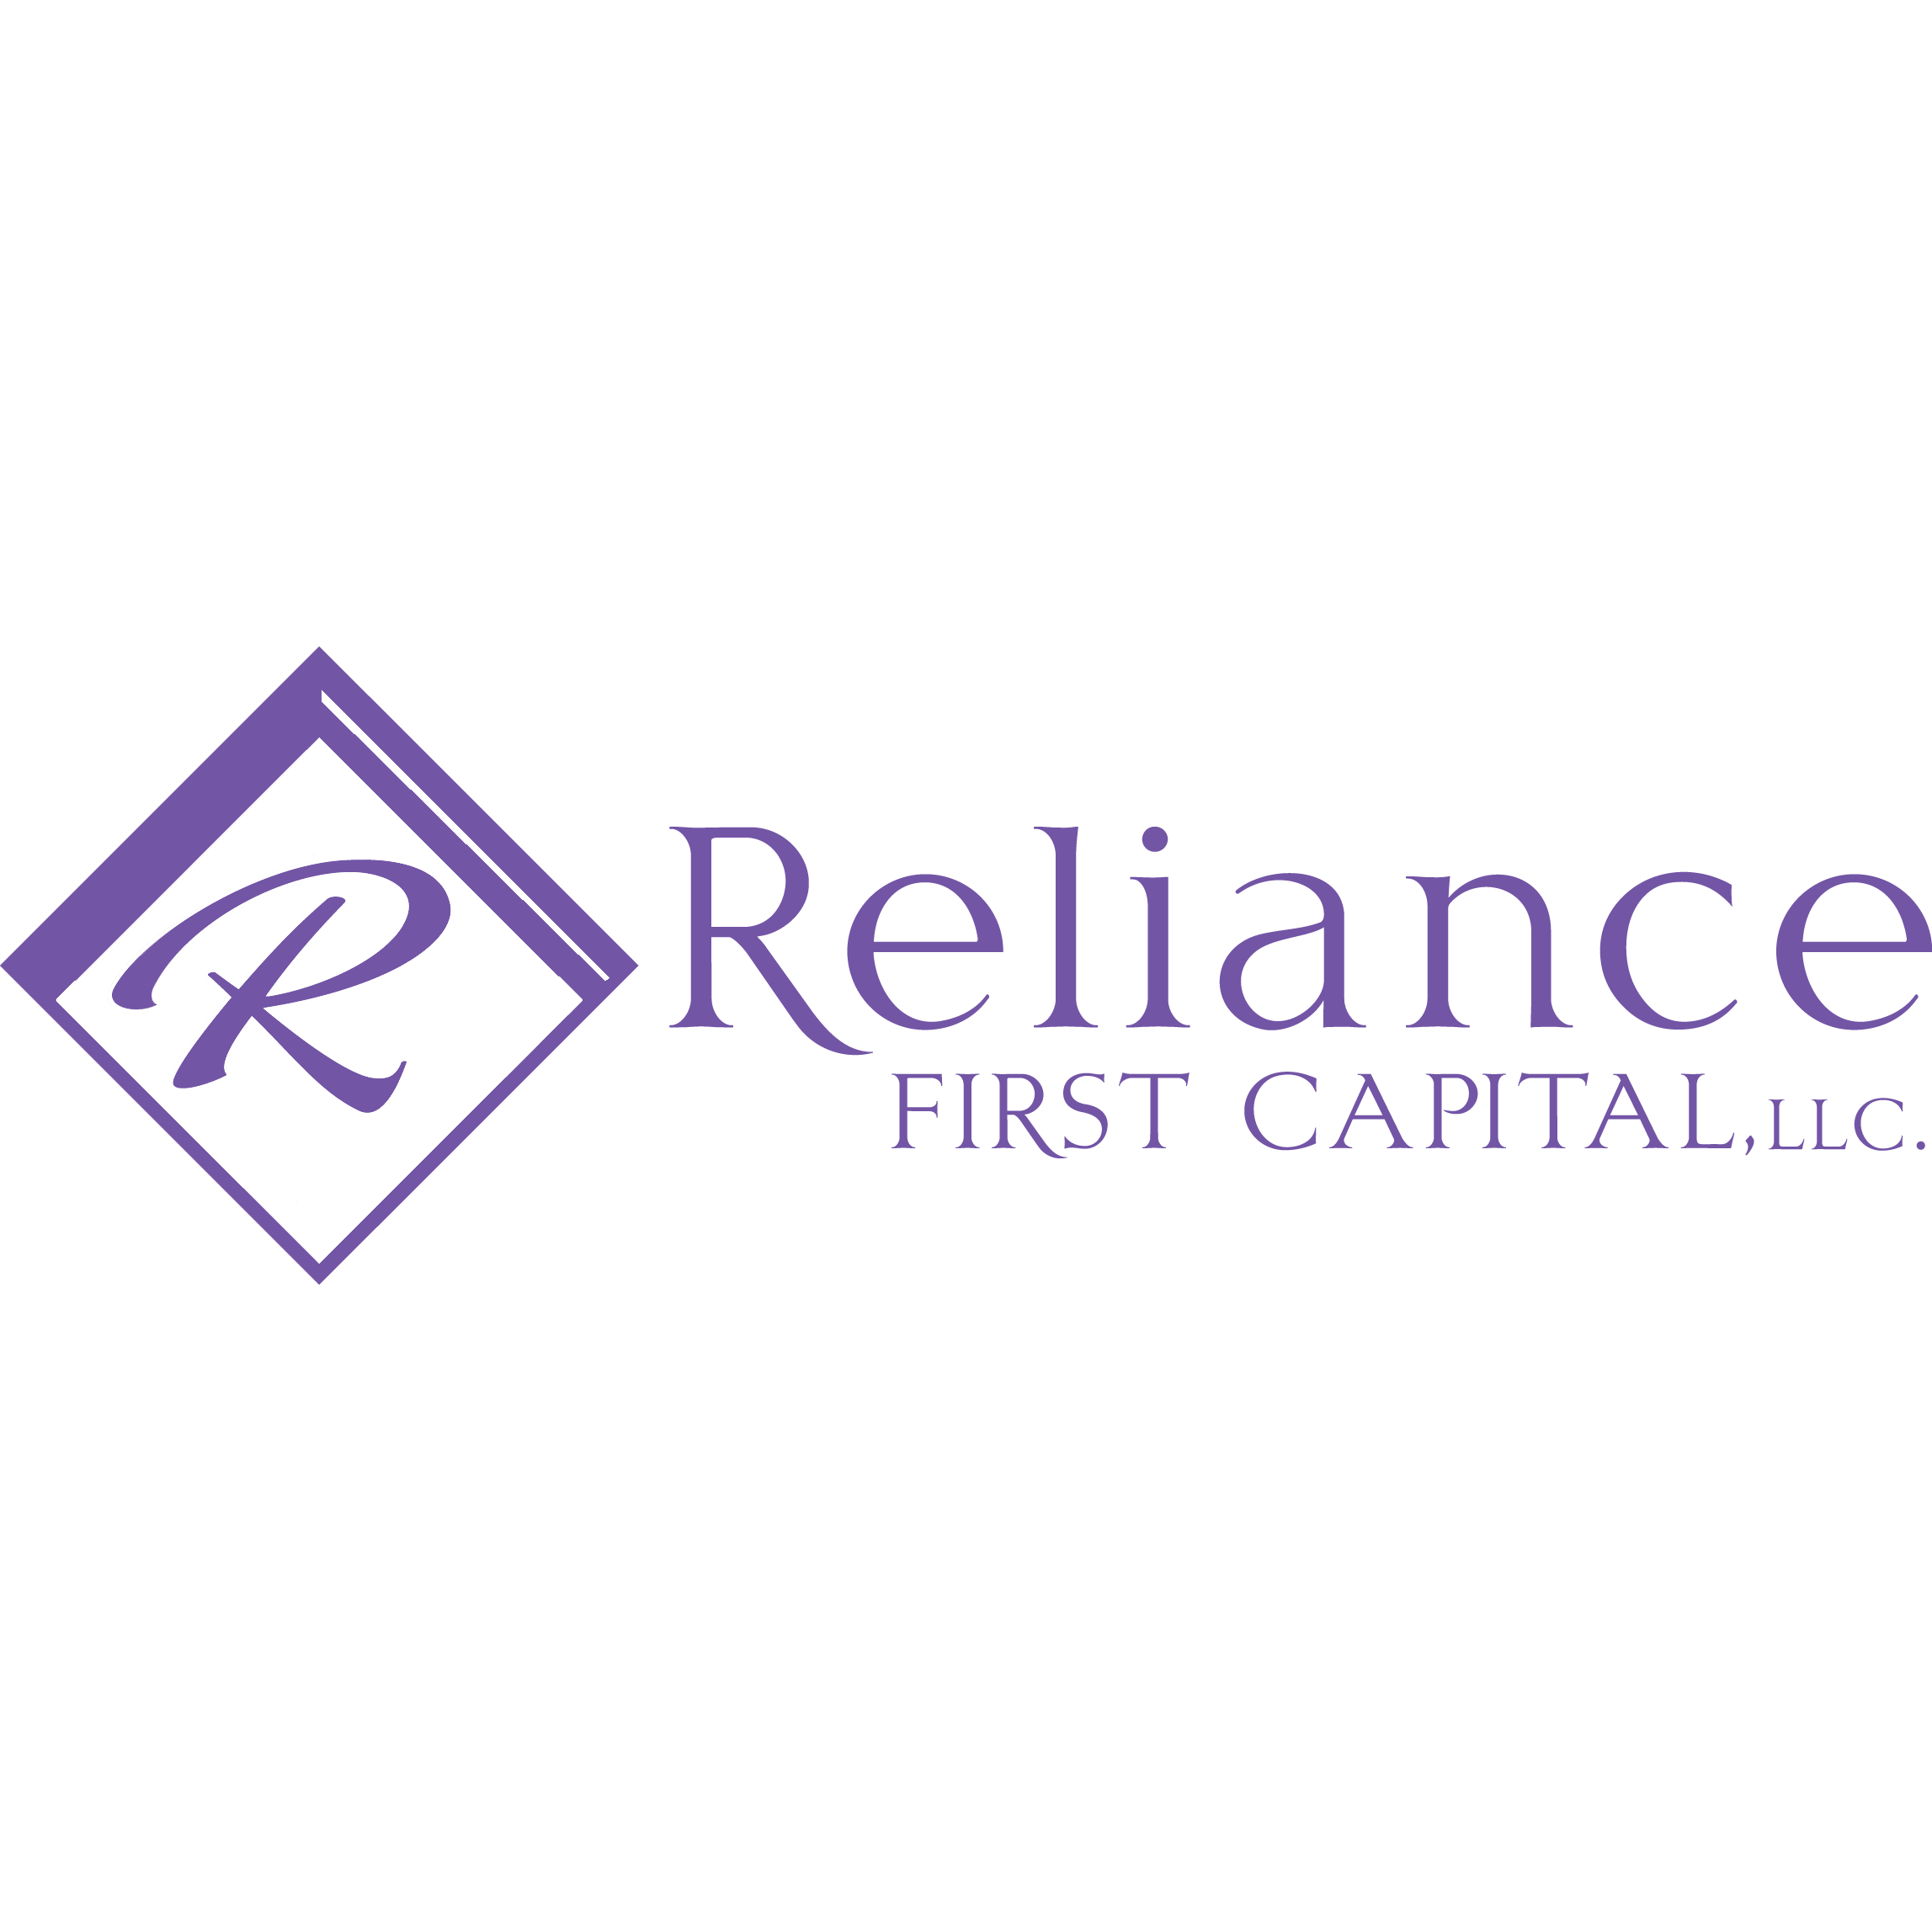 Reliance First Capital